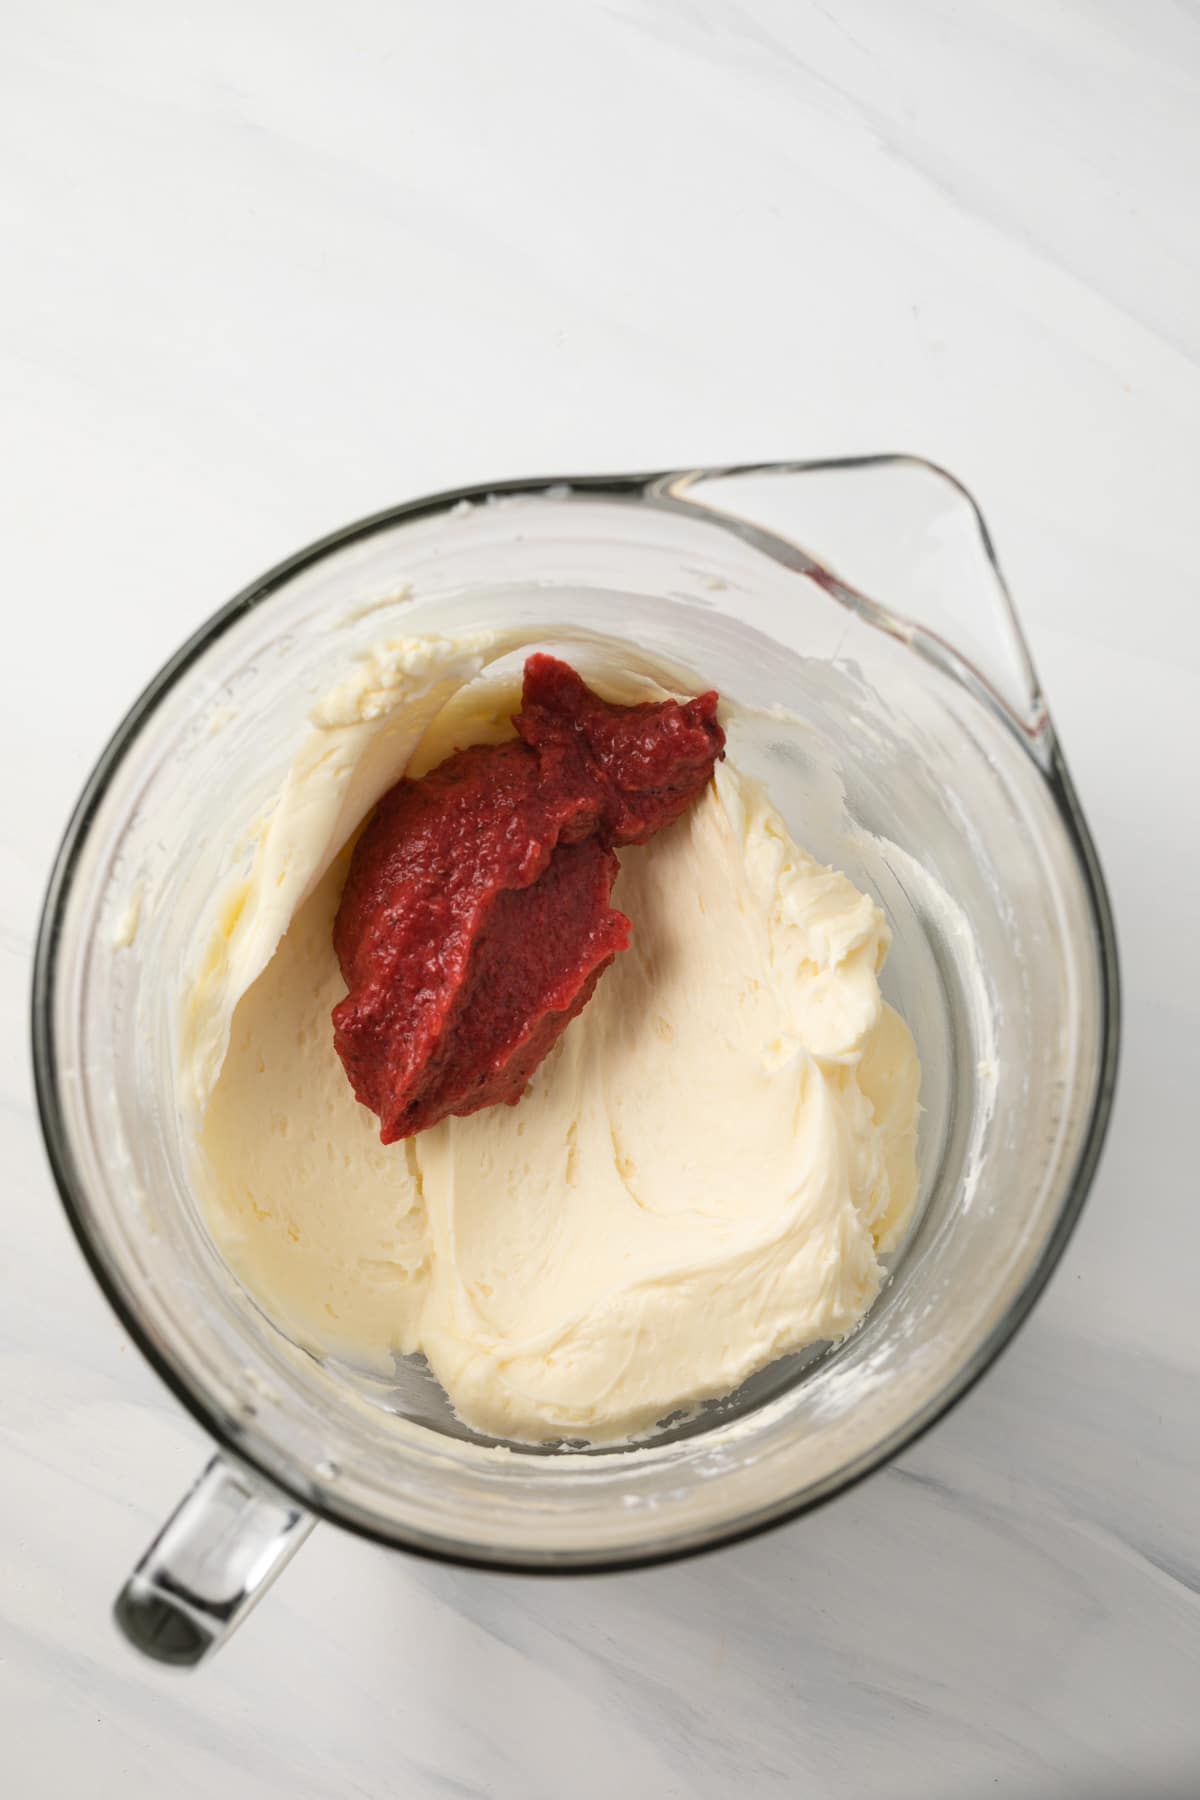 Buttercream frosting with strawberry puree in glass bowl.